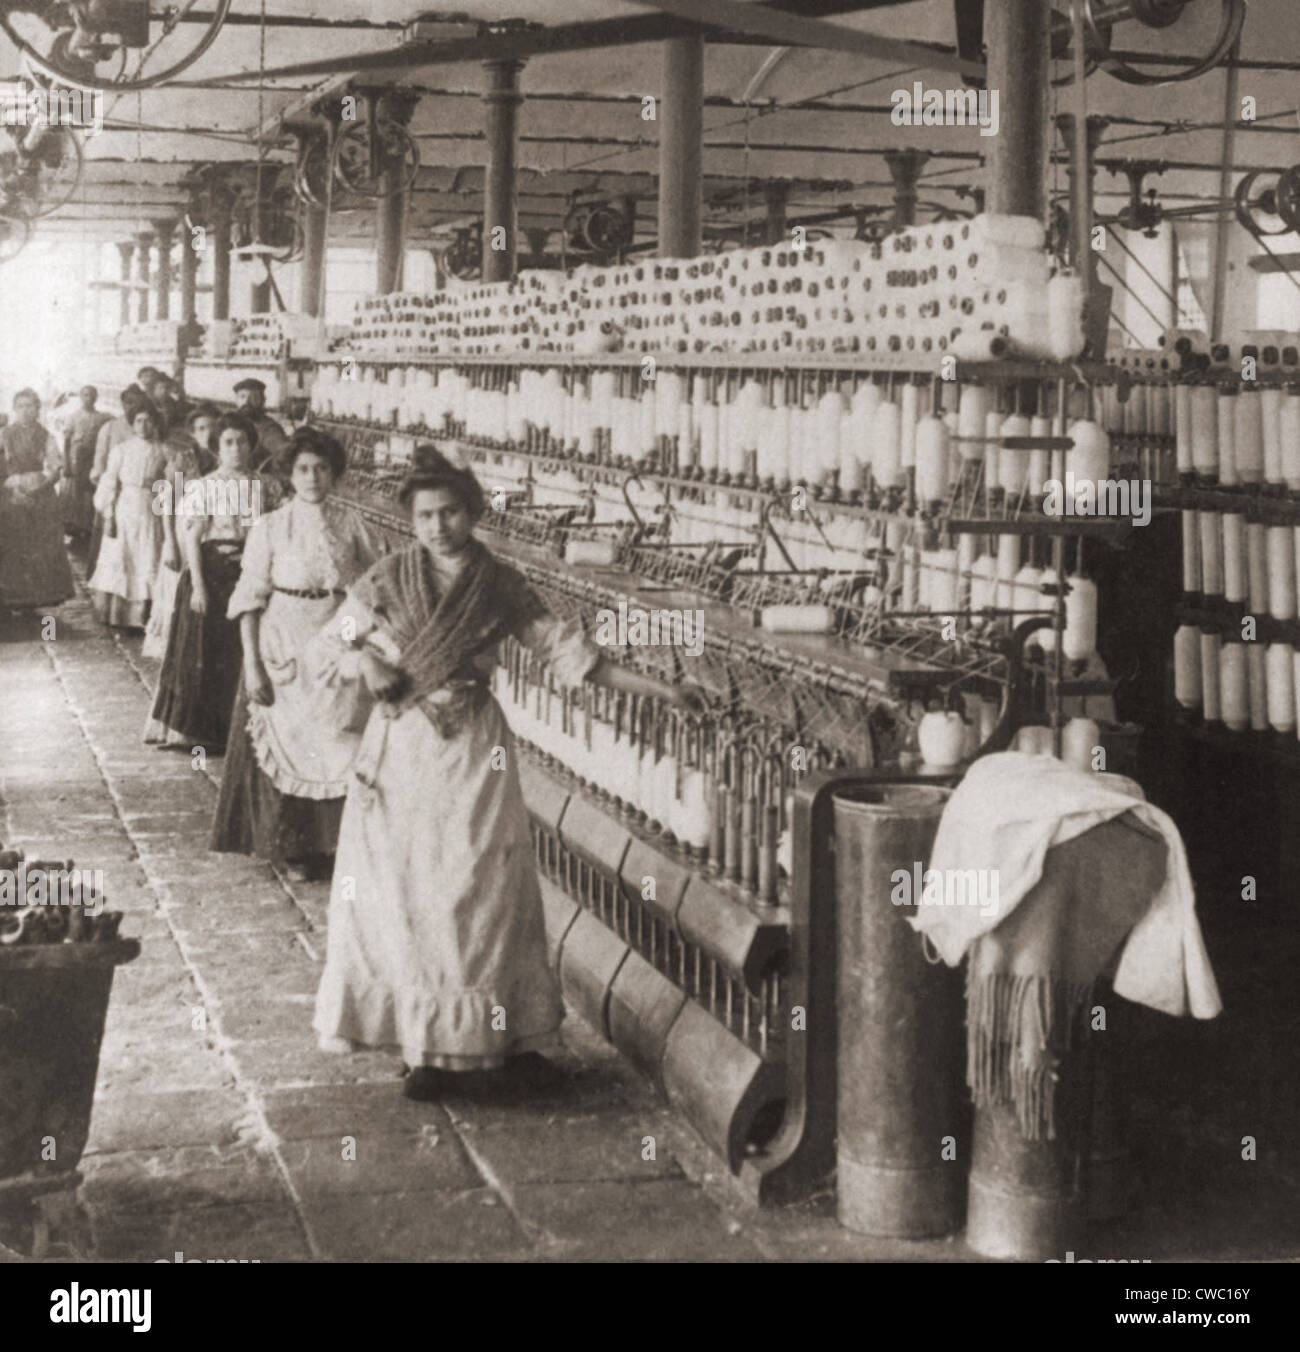 women-and-girls-working-in-the-spooling-room-of-a-cotton-mill-in-malaga-CWC16Y.jpg